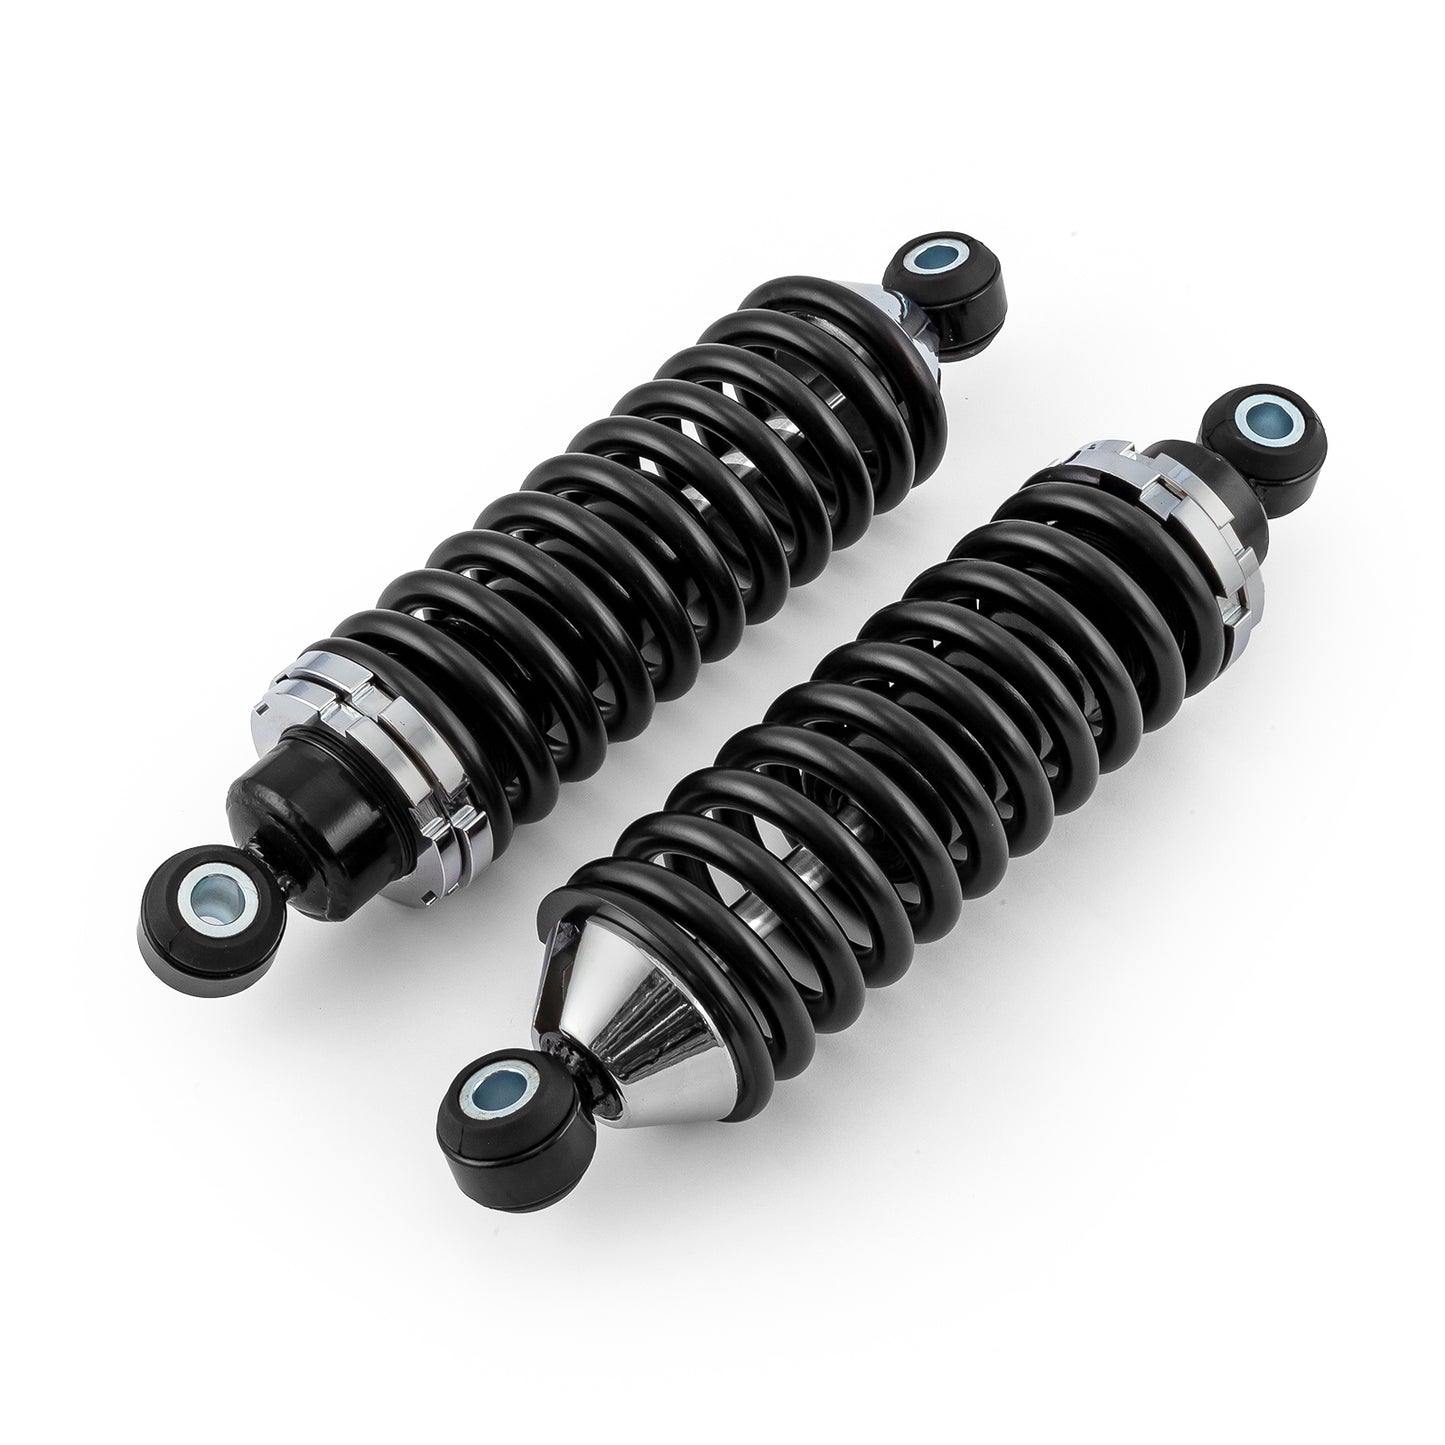 Speedmaster PCE494.1006 350 Lbs/in Spring Rate 12" Coil Over Shock Assemblies Adjustable (Pair)